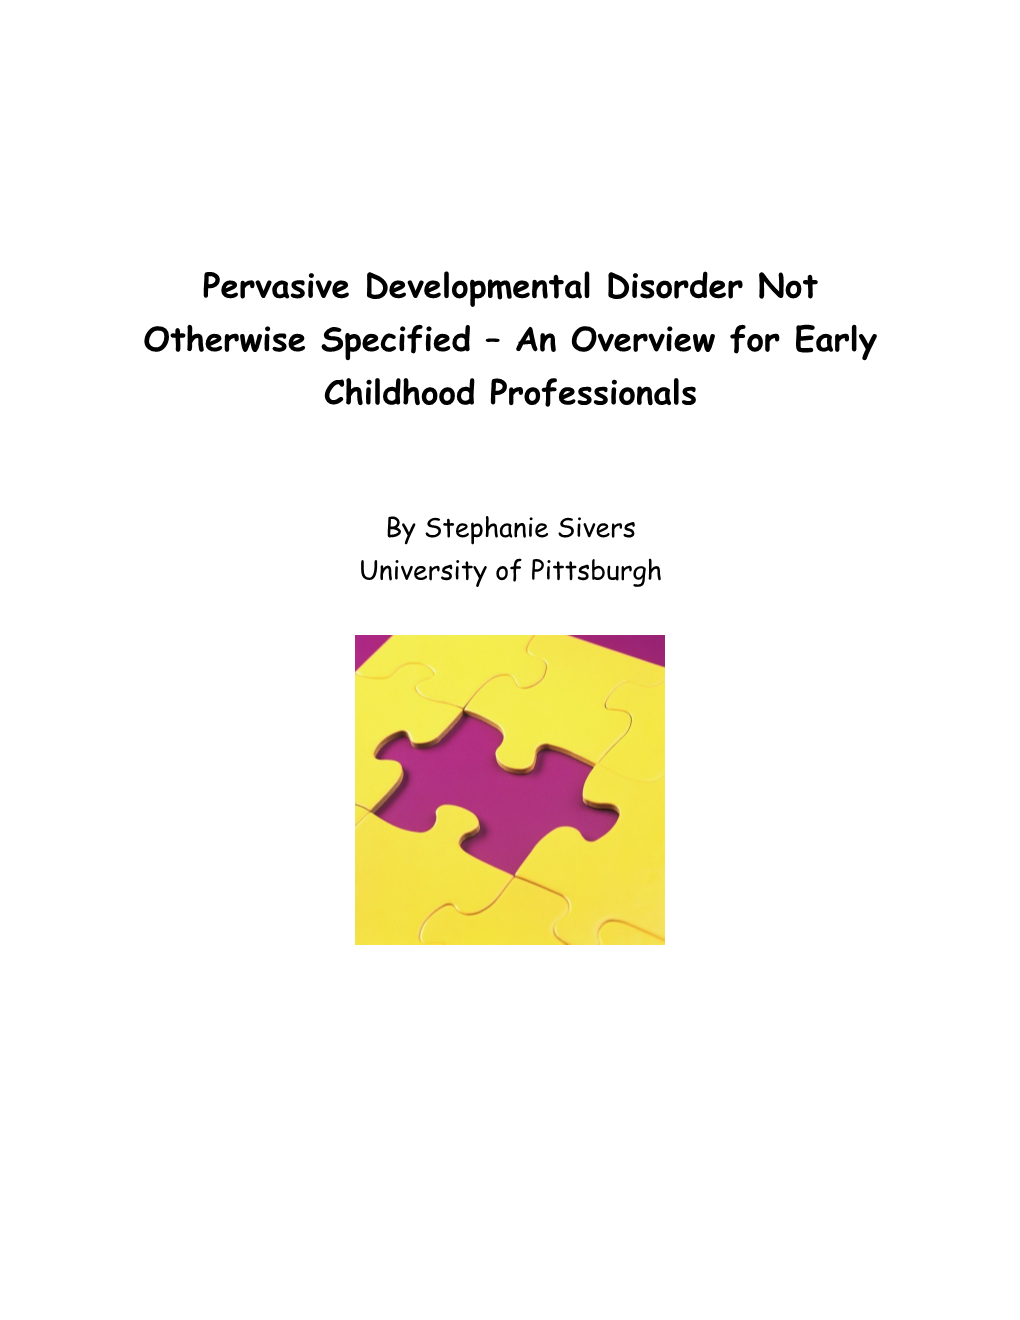 Pervasive Developmental Disorder Not Otherwise Specified an Overview for Early Childhood